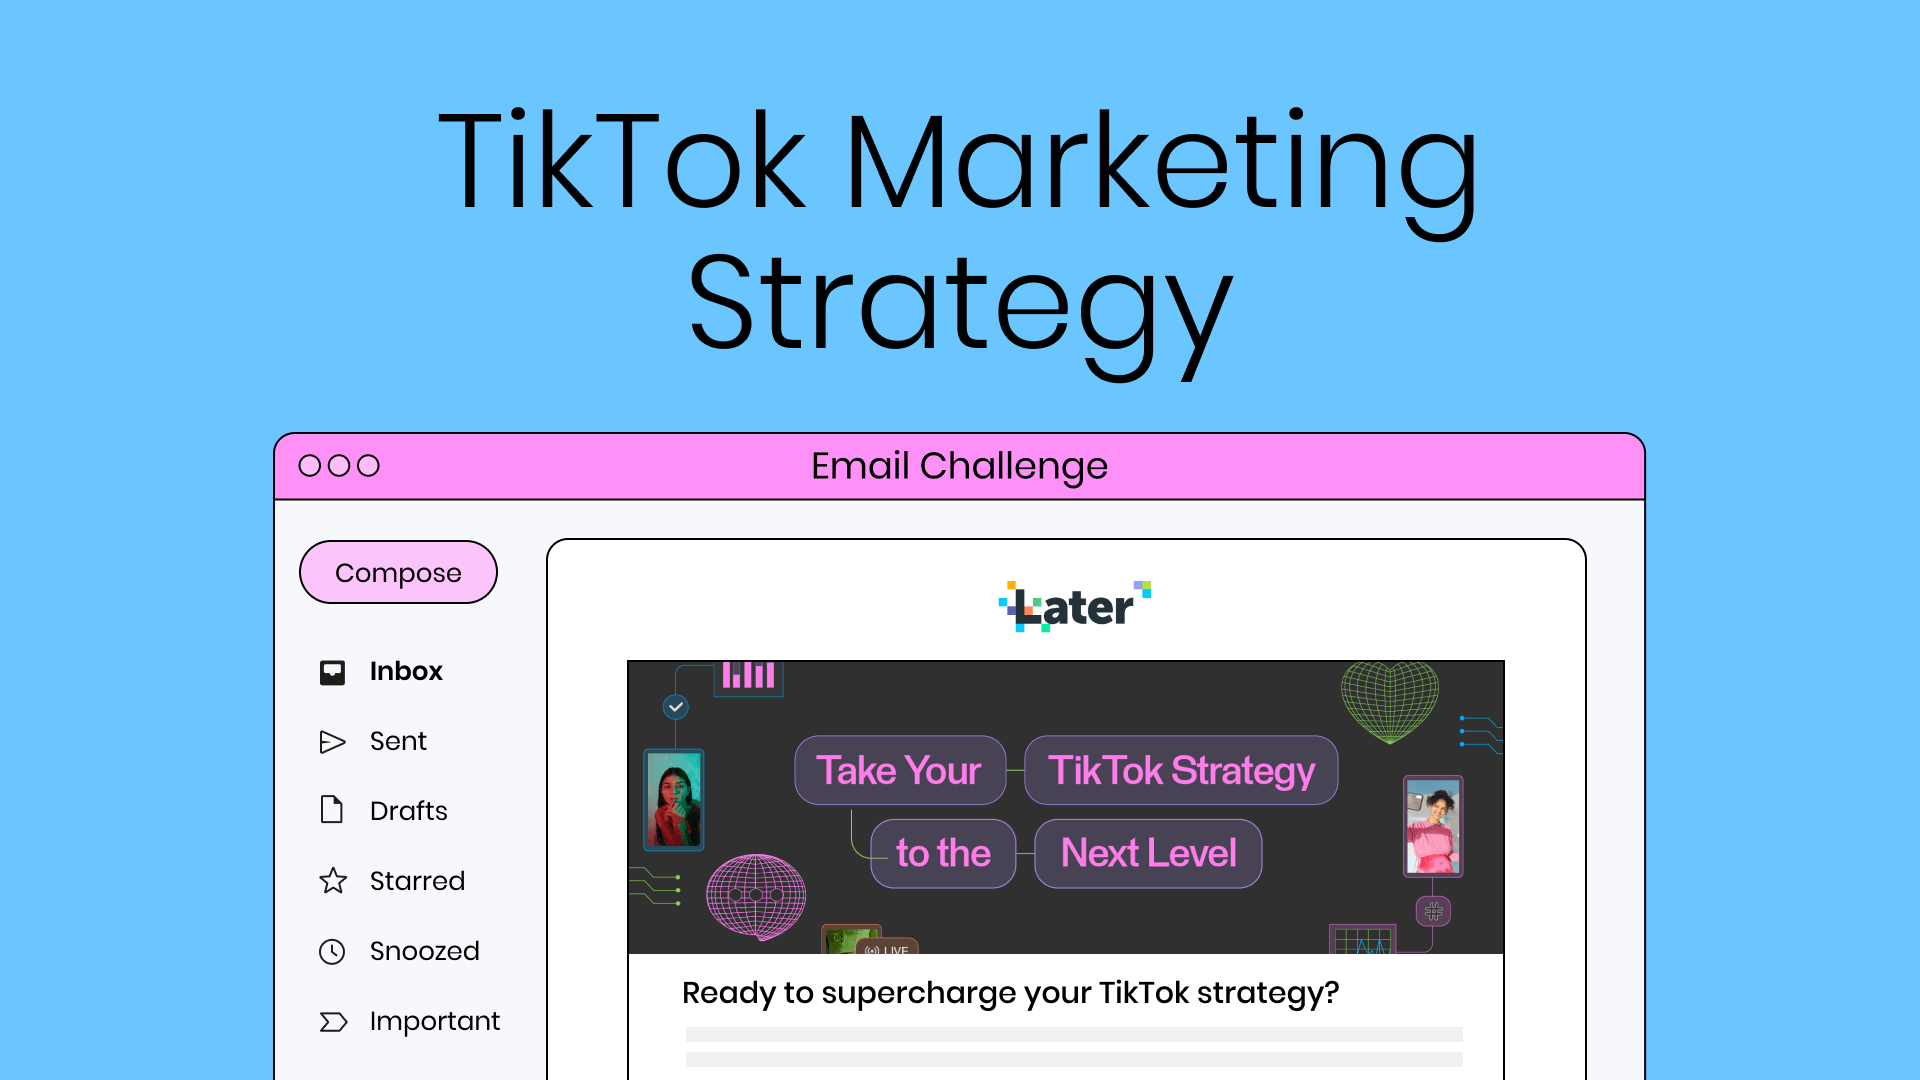 Thumbnail image with the title “tiktok marketing strategy” above a sample email inbox against a blue background